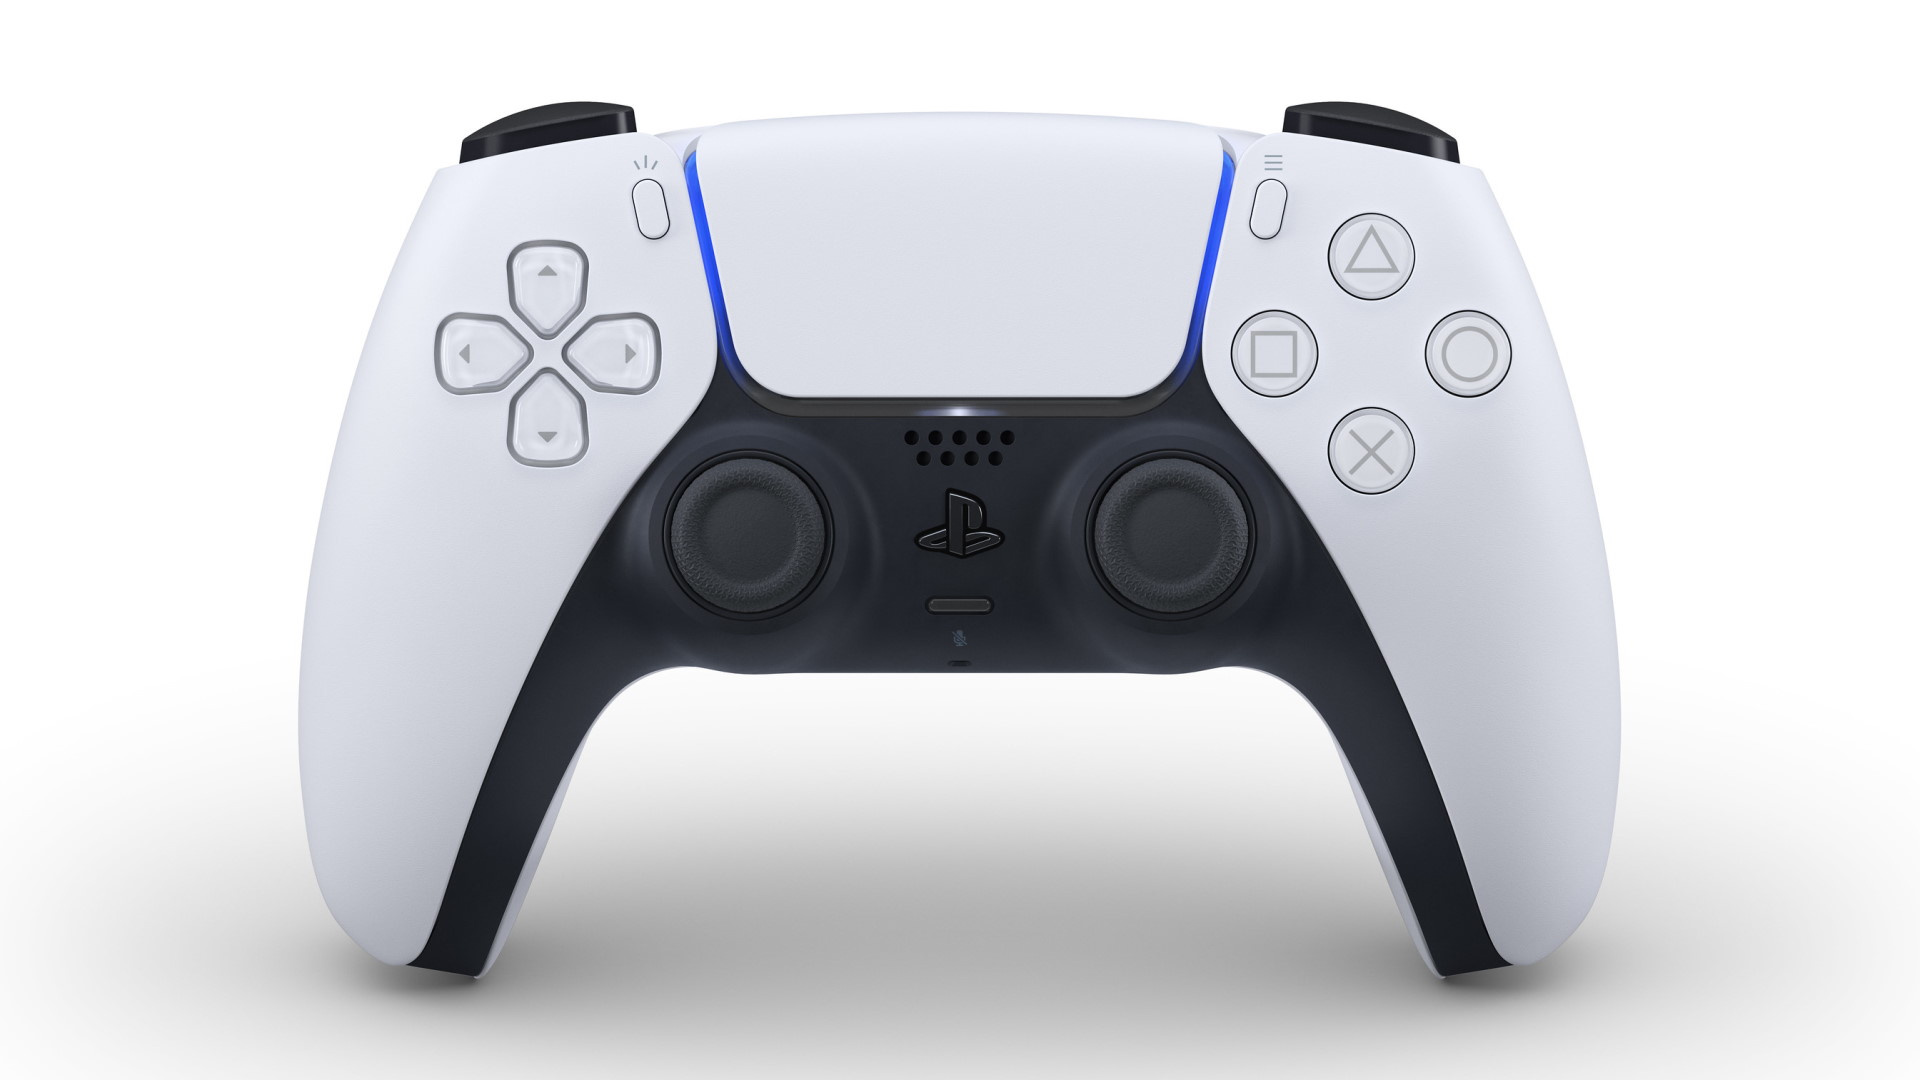 playstation now controller pc